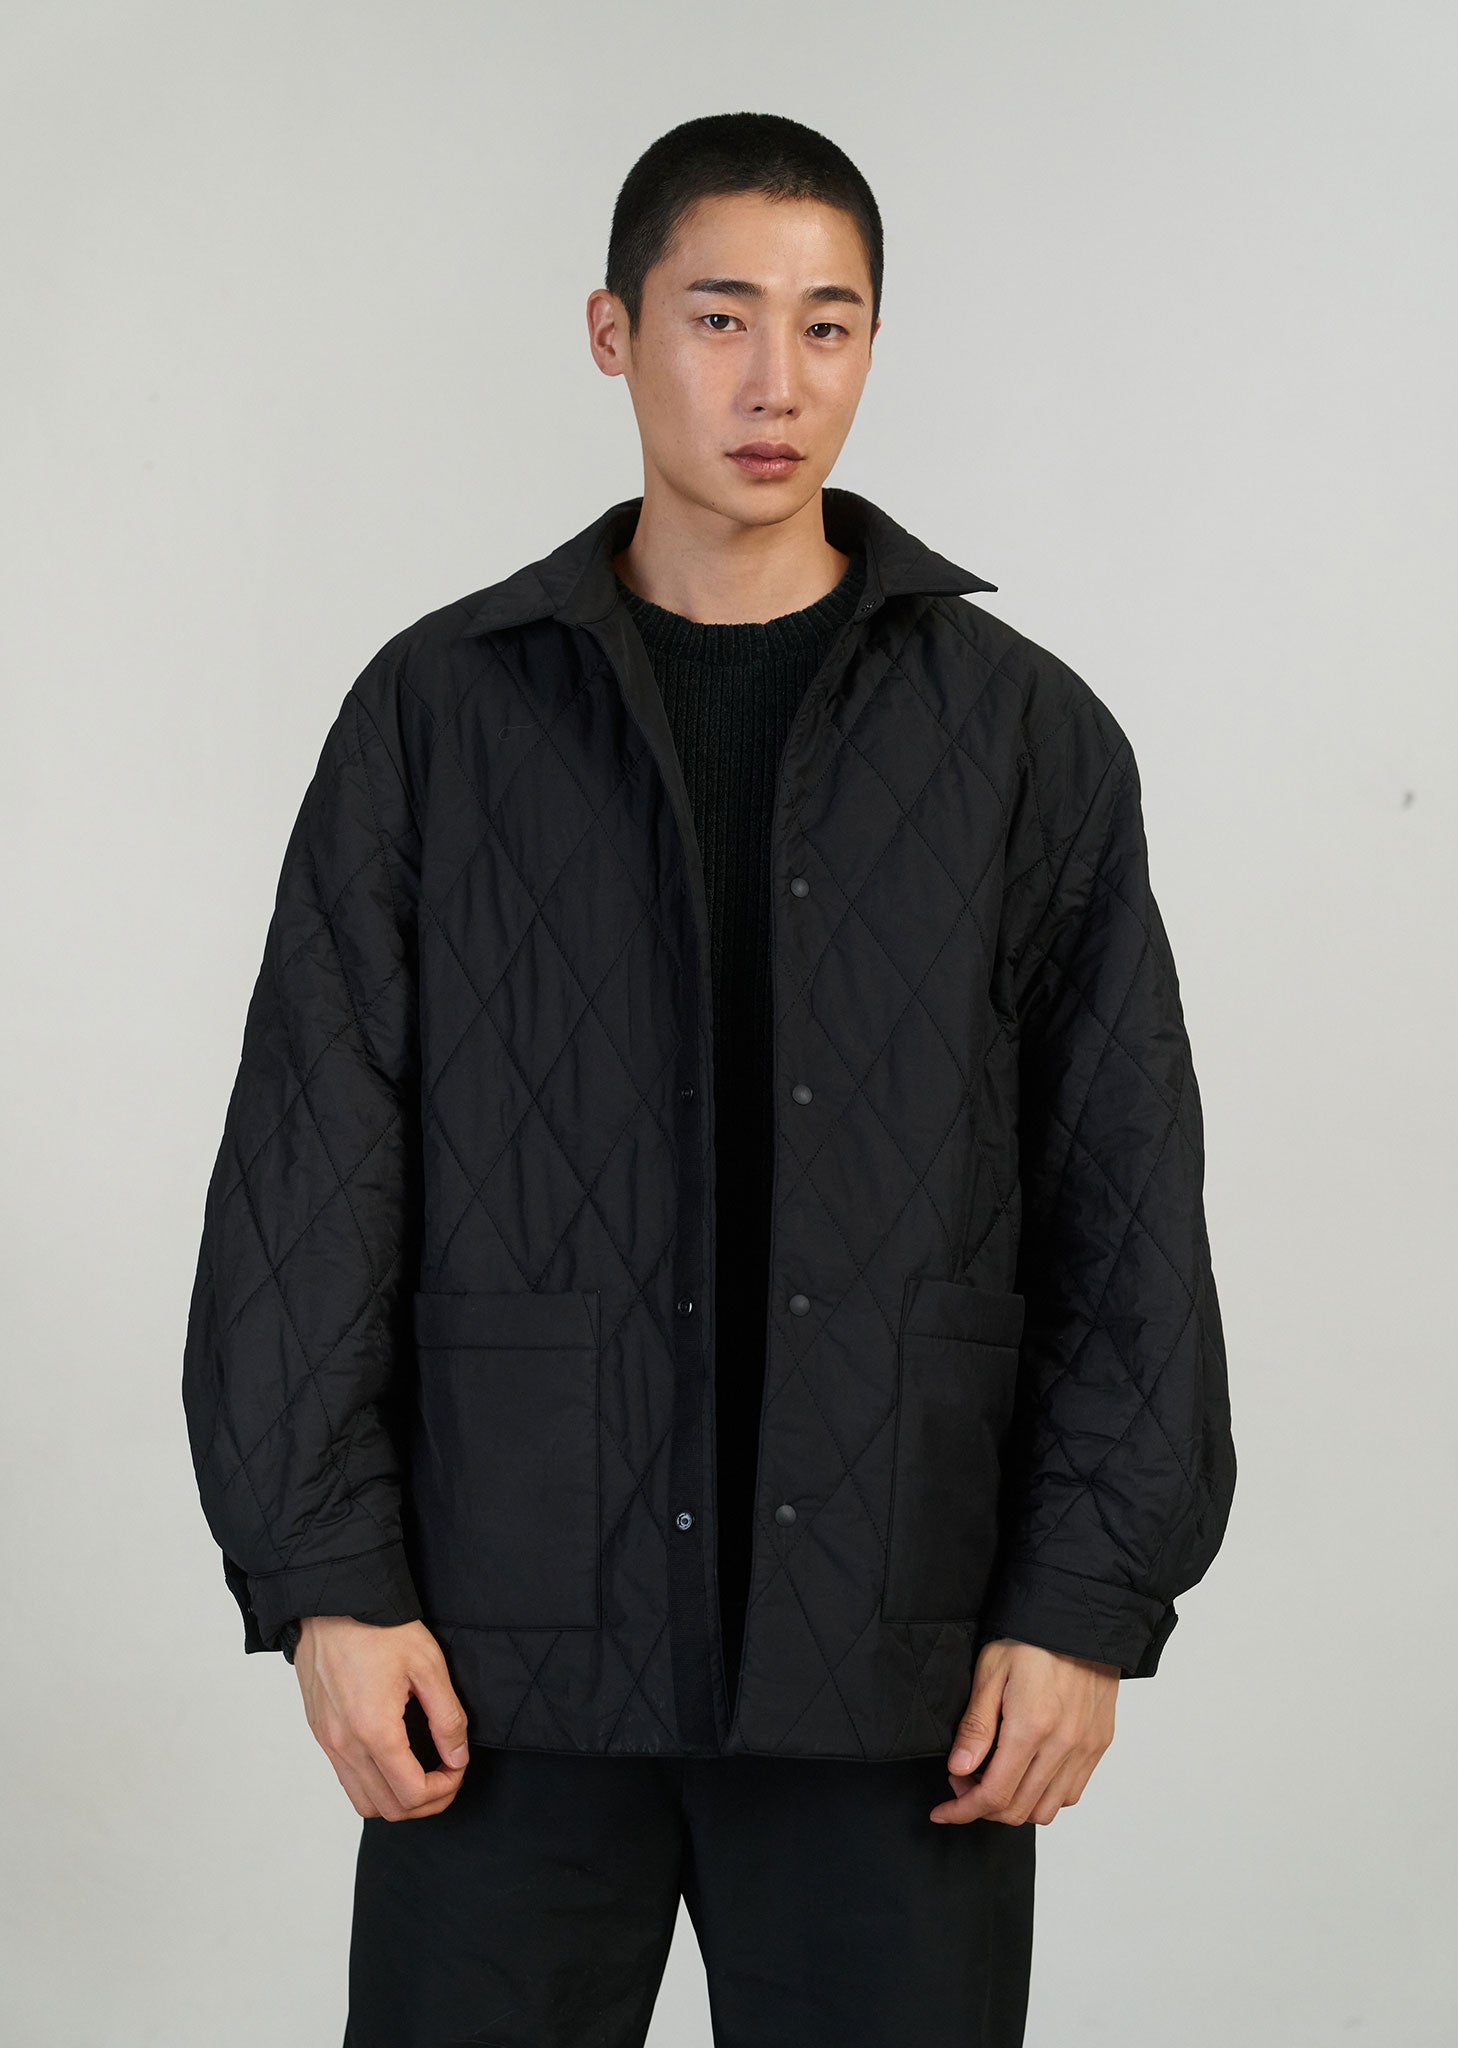 REVERSIBLE QUILTED SHIRT JACKET